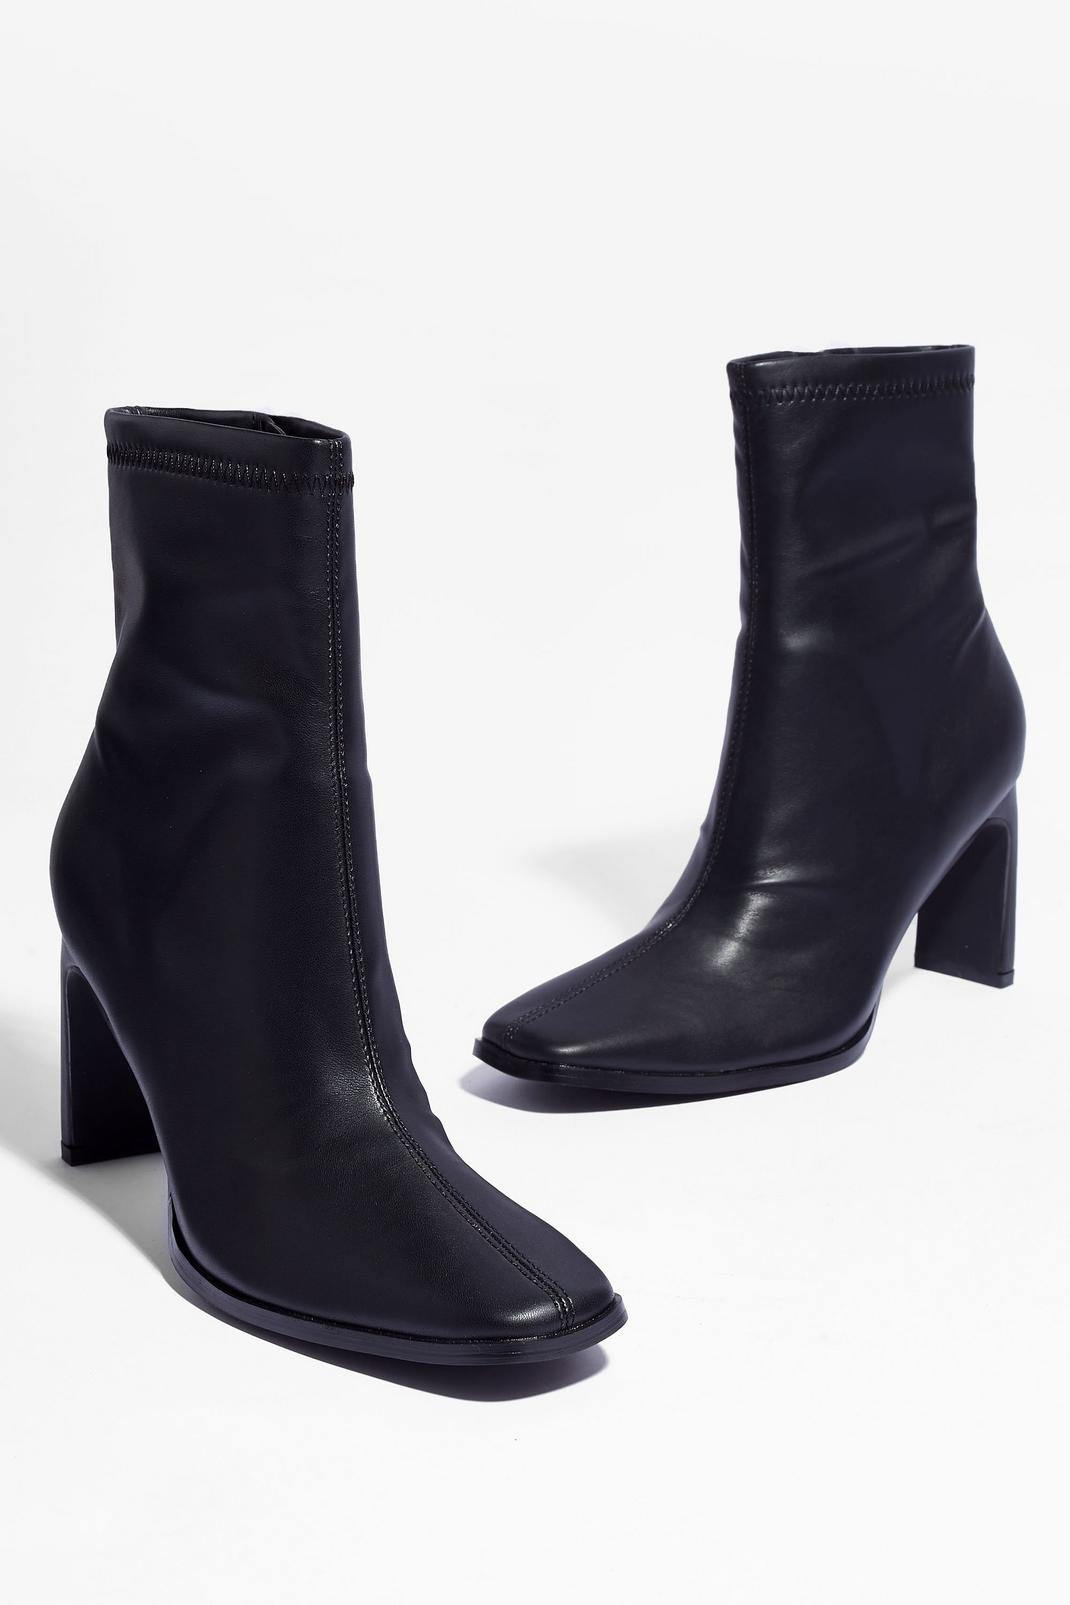 Square's Something About You Faux Leather Boots | Nasty Gal